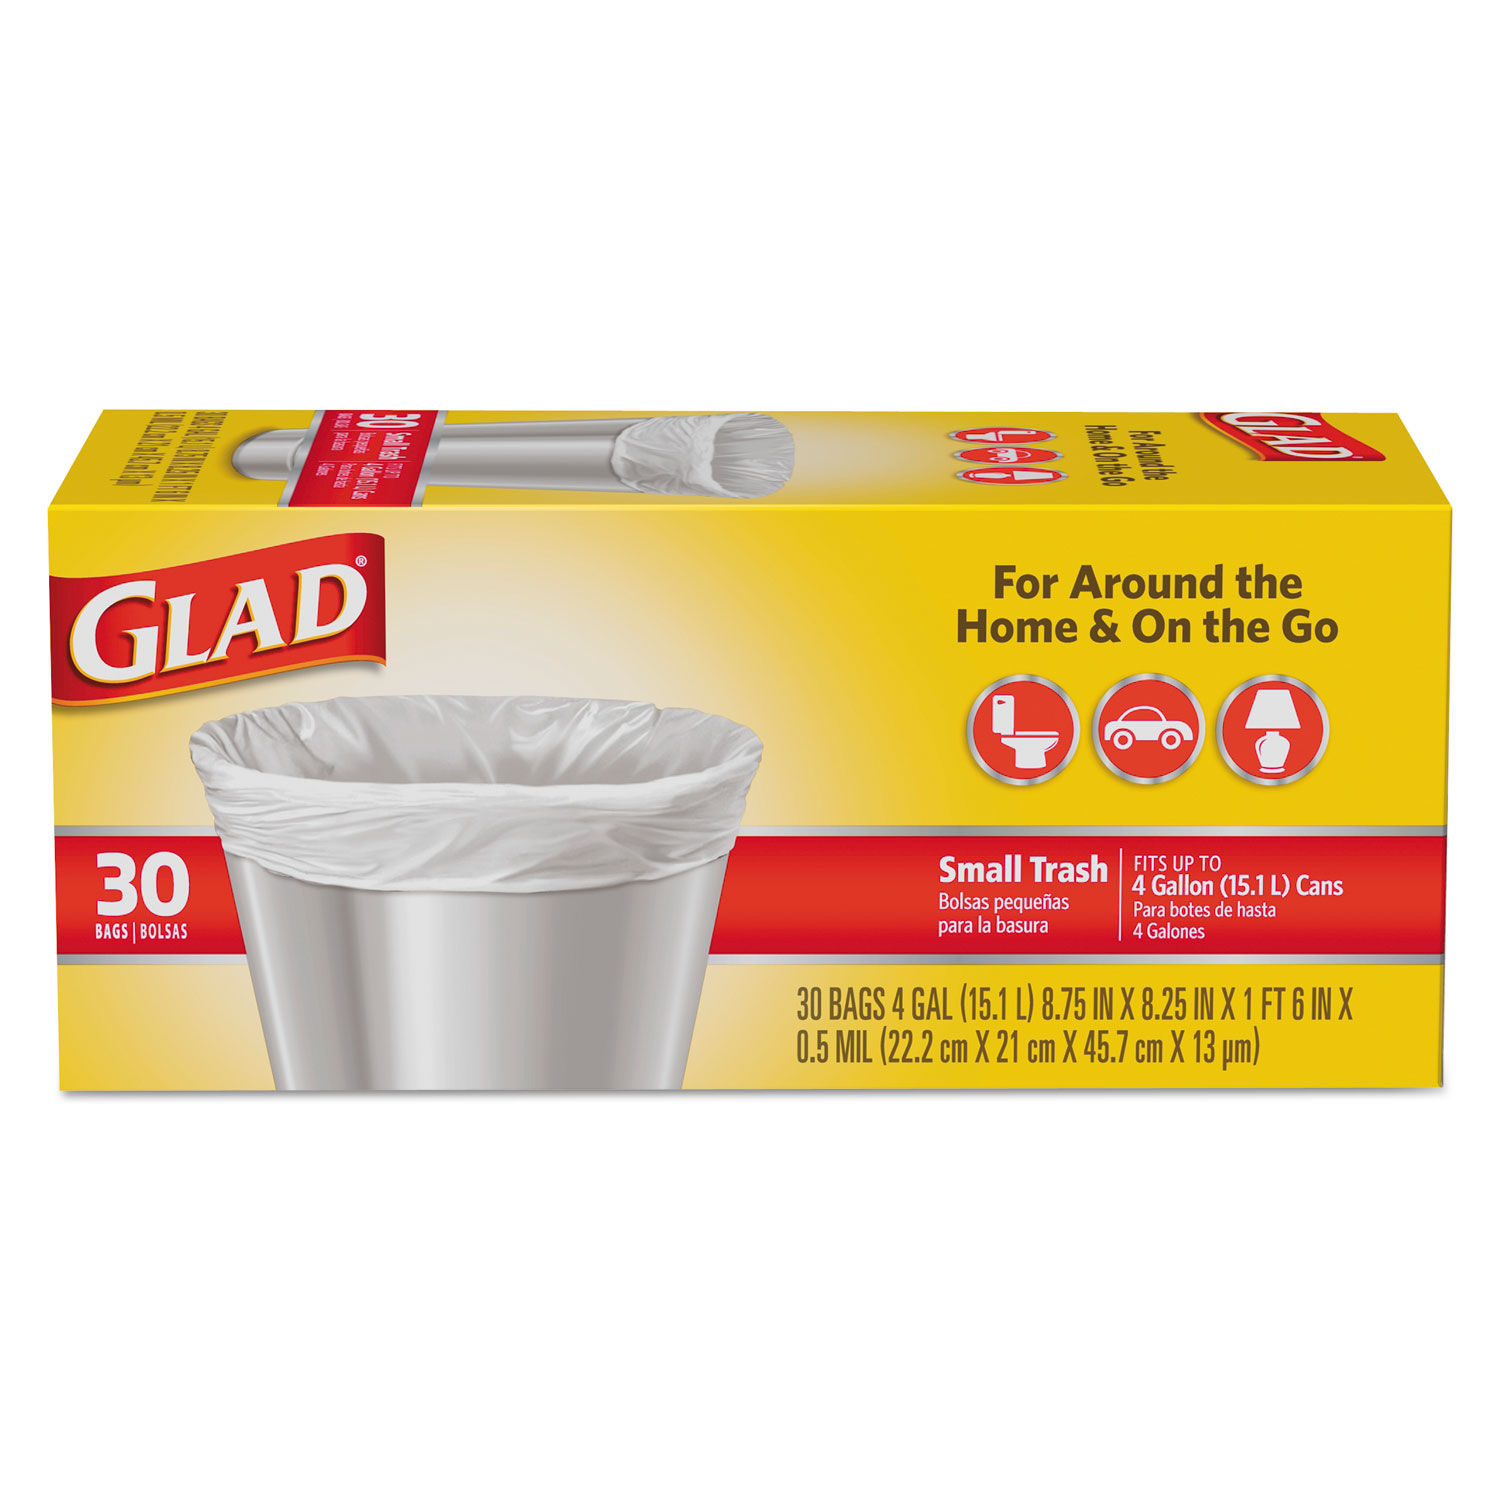 Small Flat Top Trash Bags by Glad® CLO78817EA